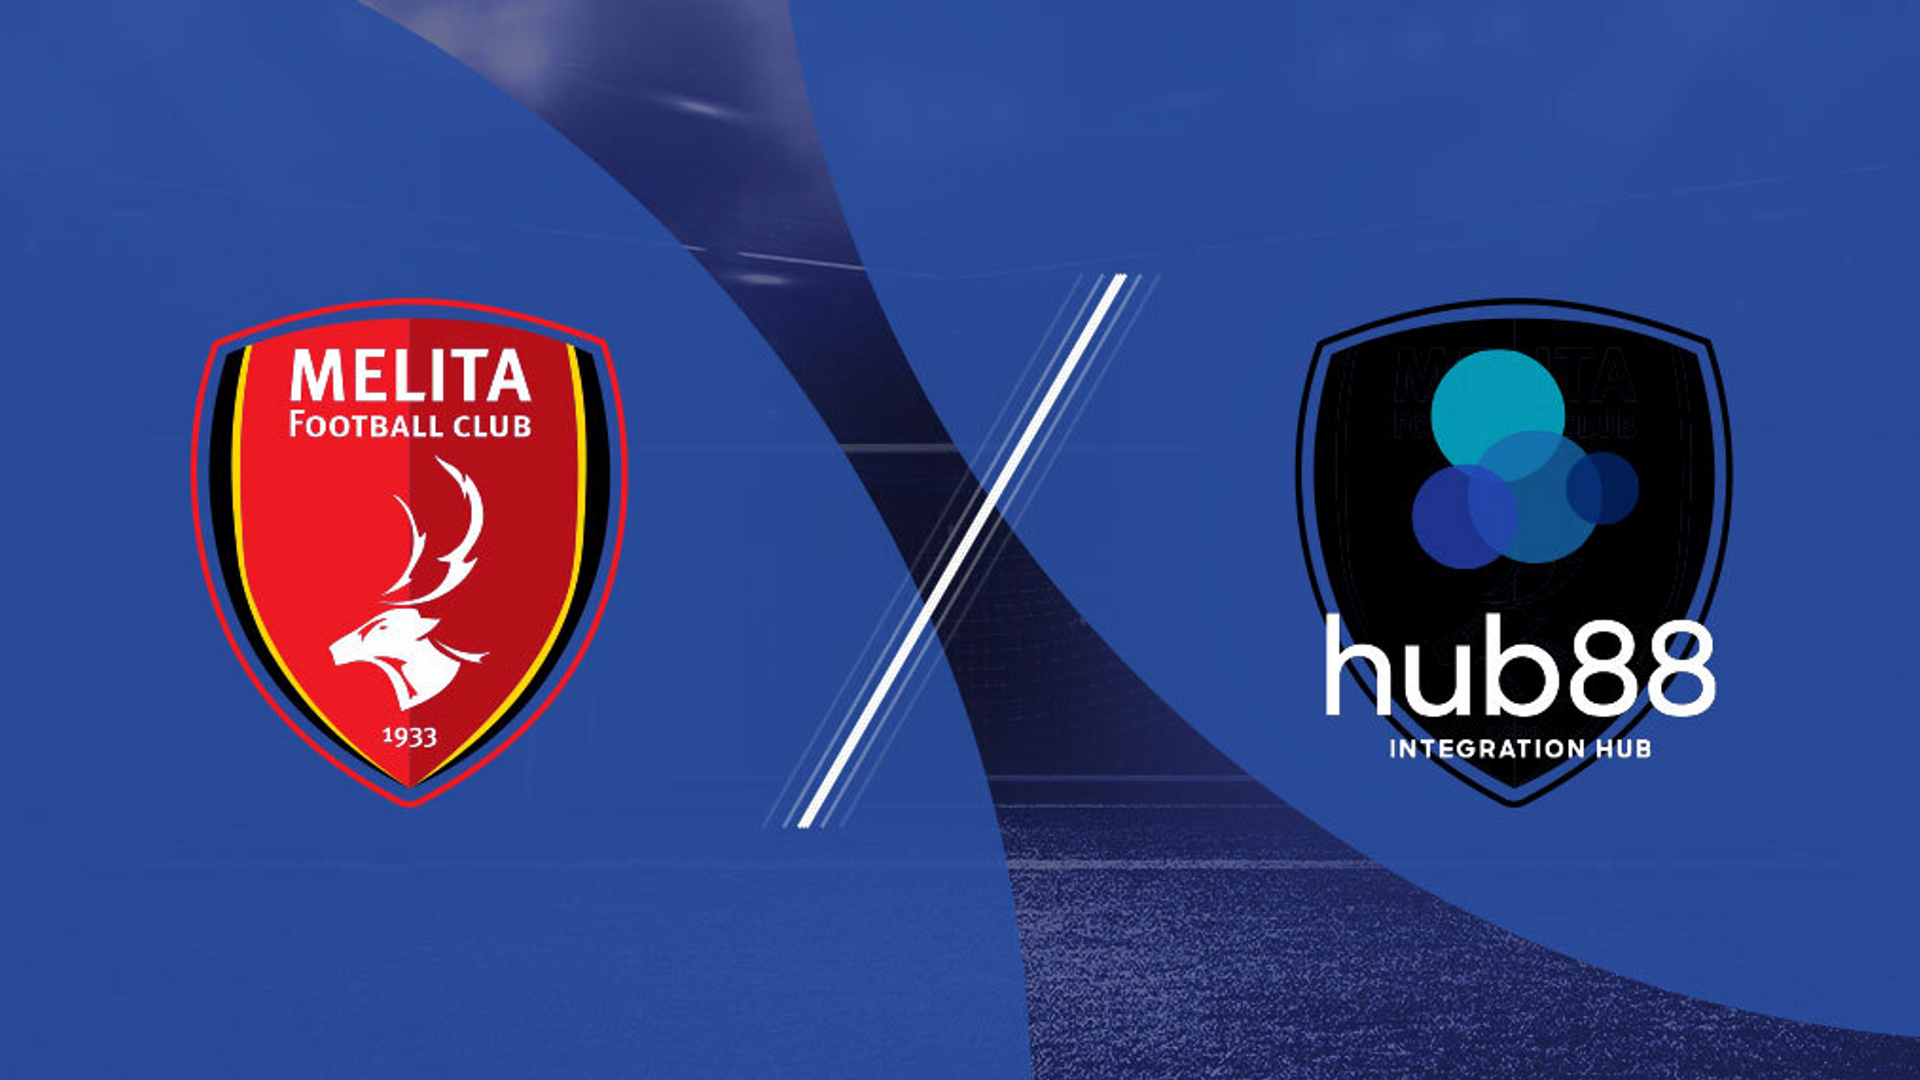 Cover Image for Hub88 partners up with Malta football club Melita FC